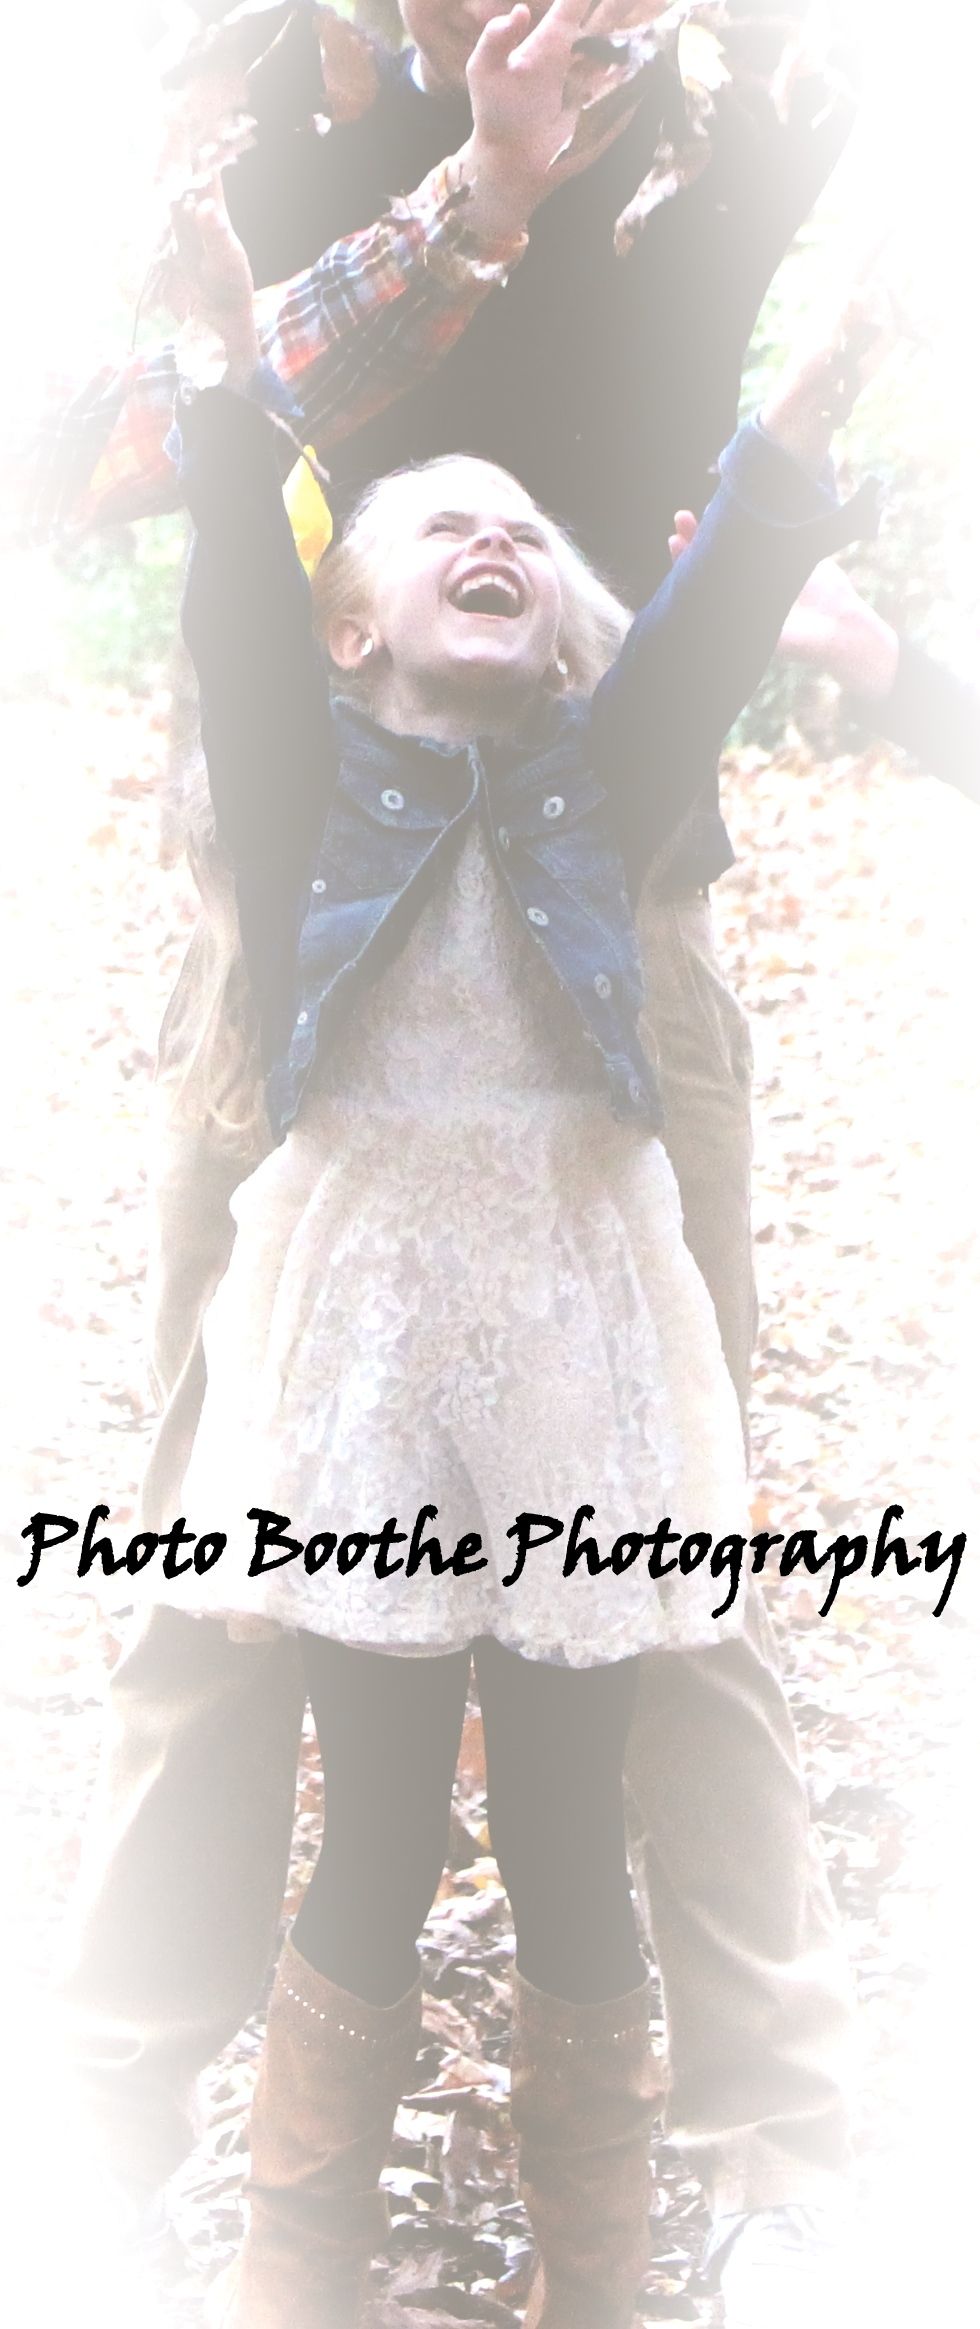 Photo Boothe Photography